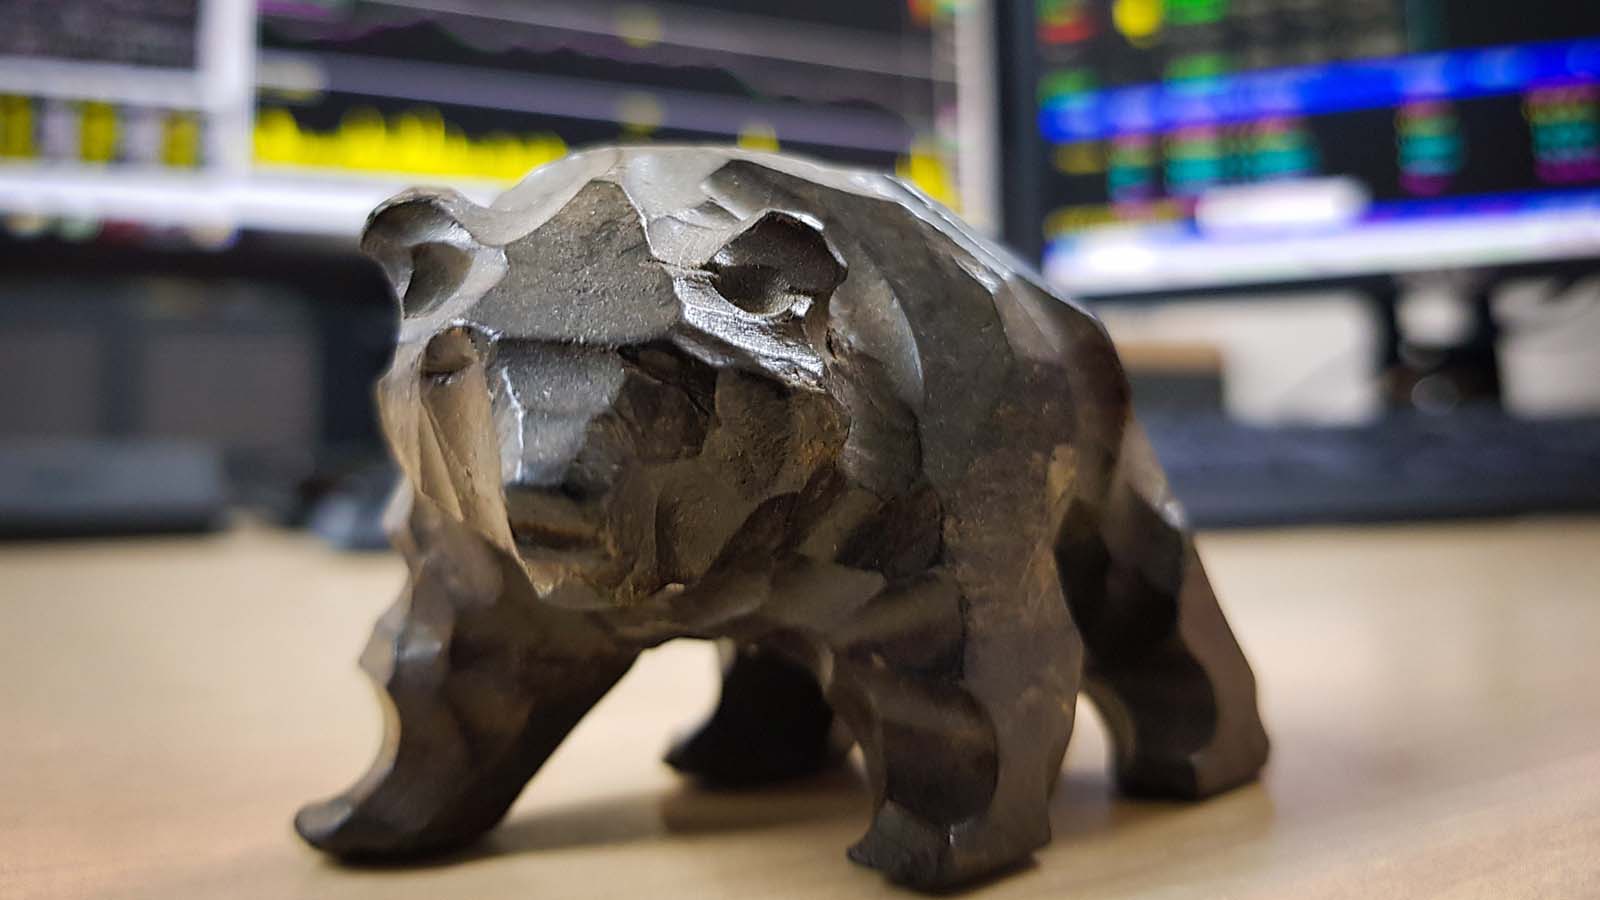 An image of a bear figurine in front of blurred computer screens displaying stock charts